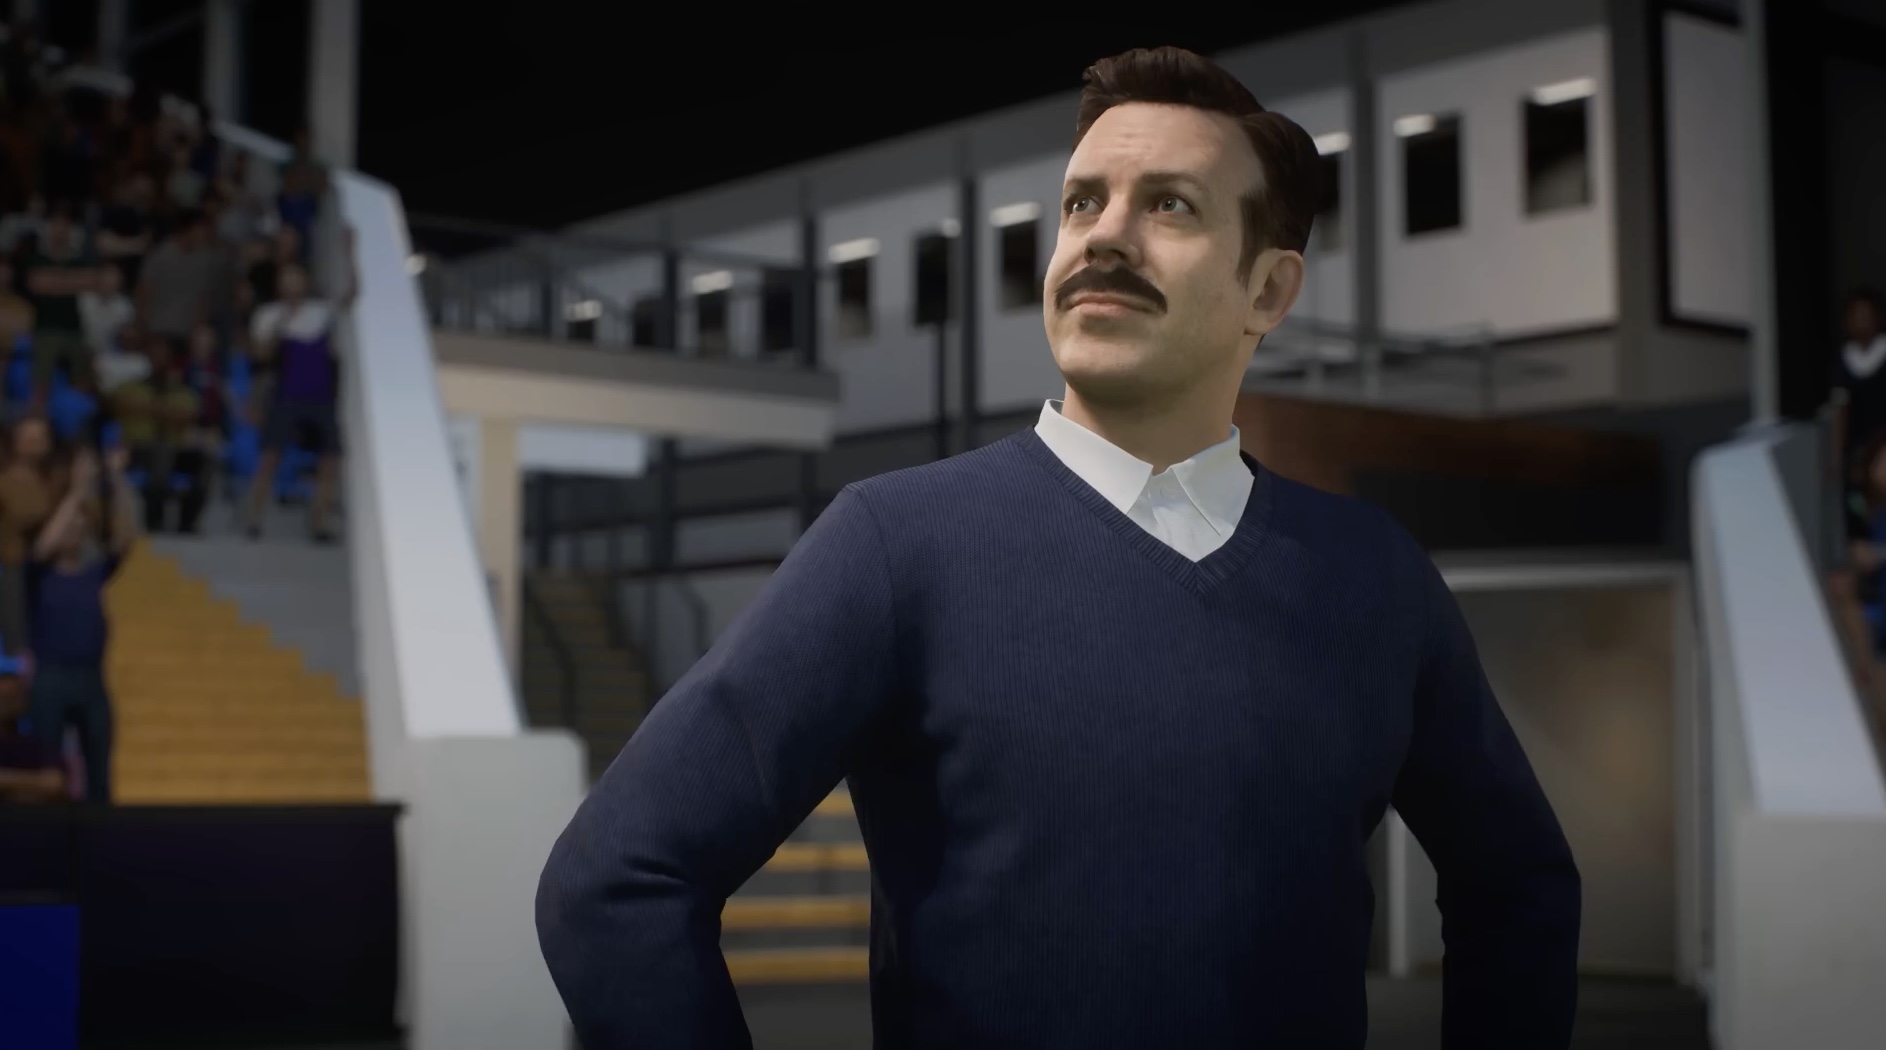 FIFA 23 Ted Lasso Ultimate Team: How to get Ted Lasso, AFC Richmond kits